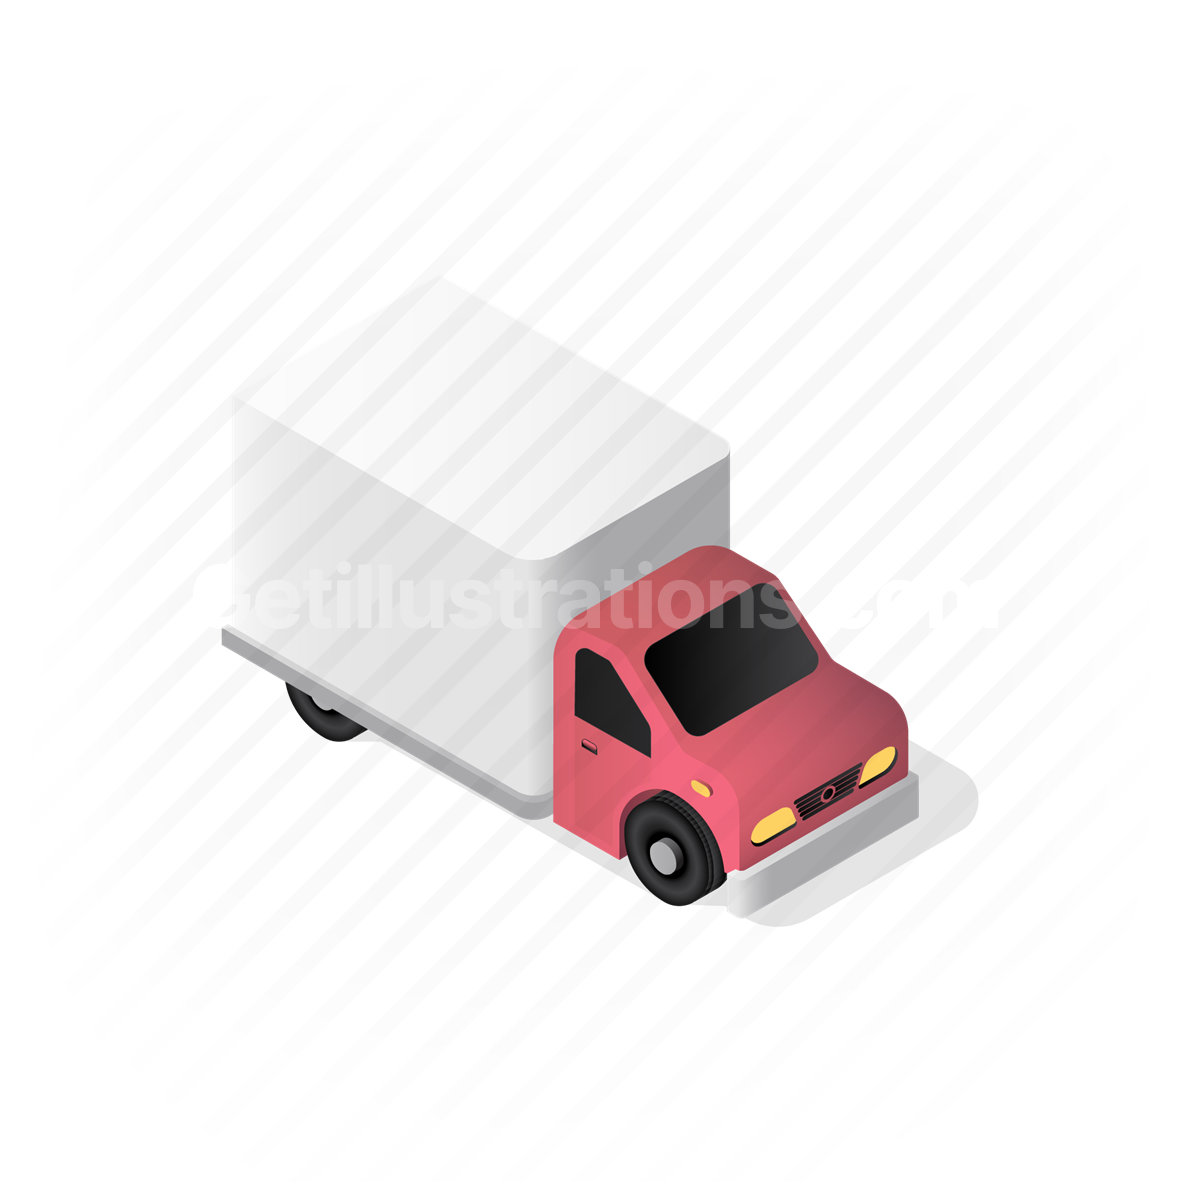 delivery truck, truck, car, vehicle, transport